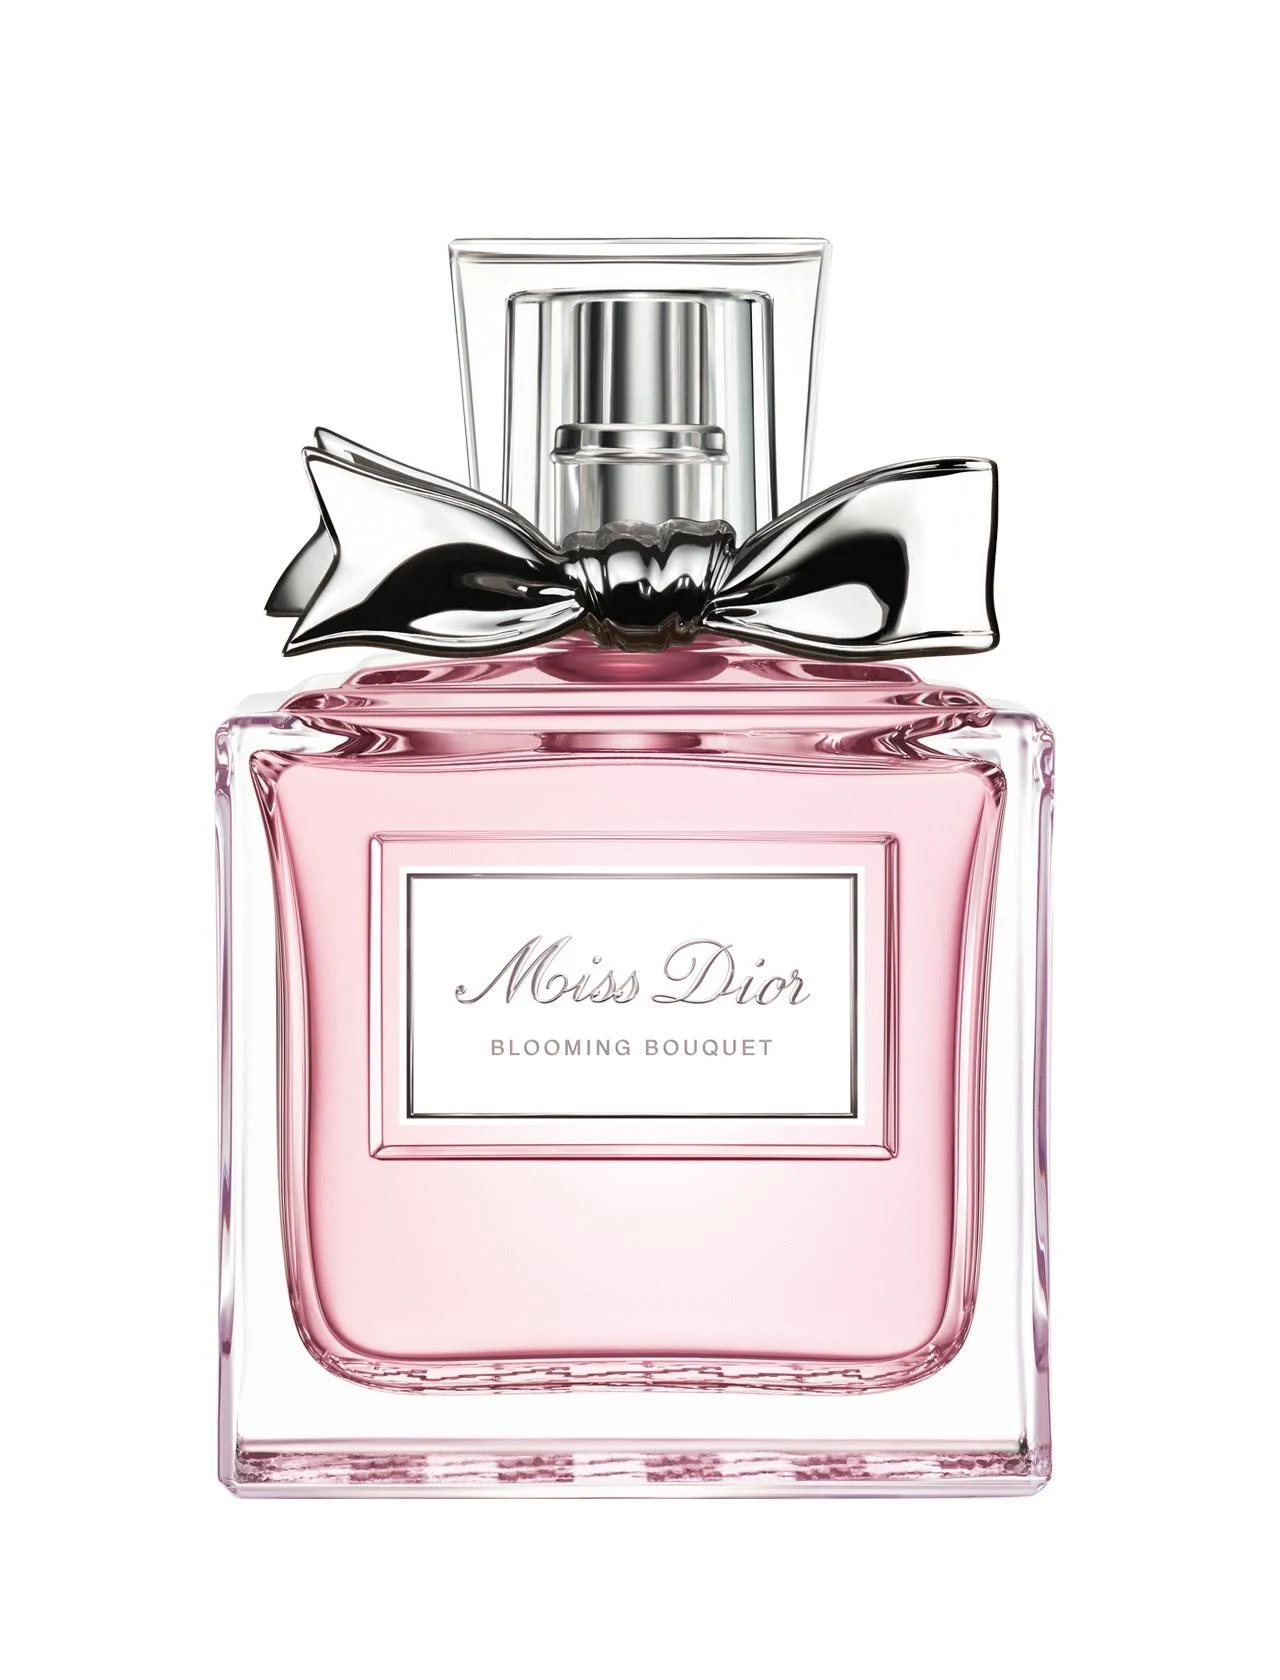 Dior Miss Dior Blooming Bouquet Edt 50 ml - Thumbnail